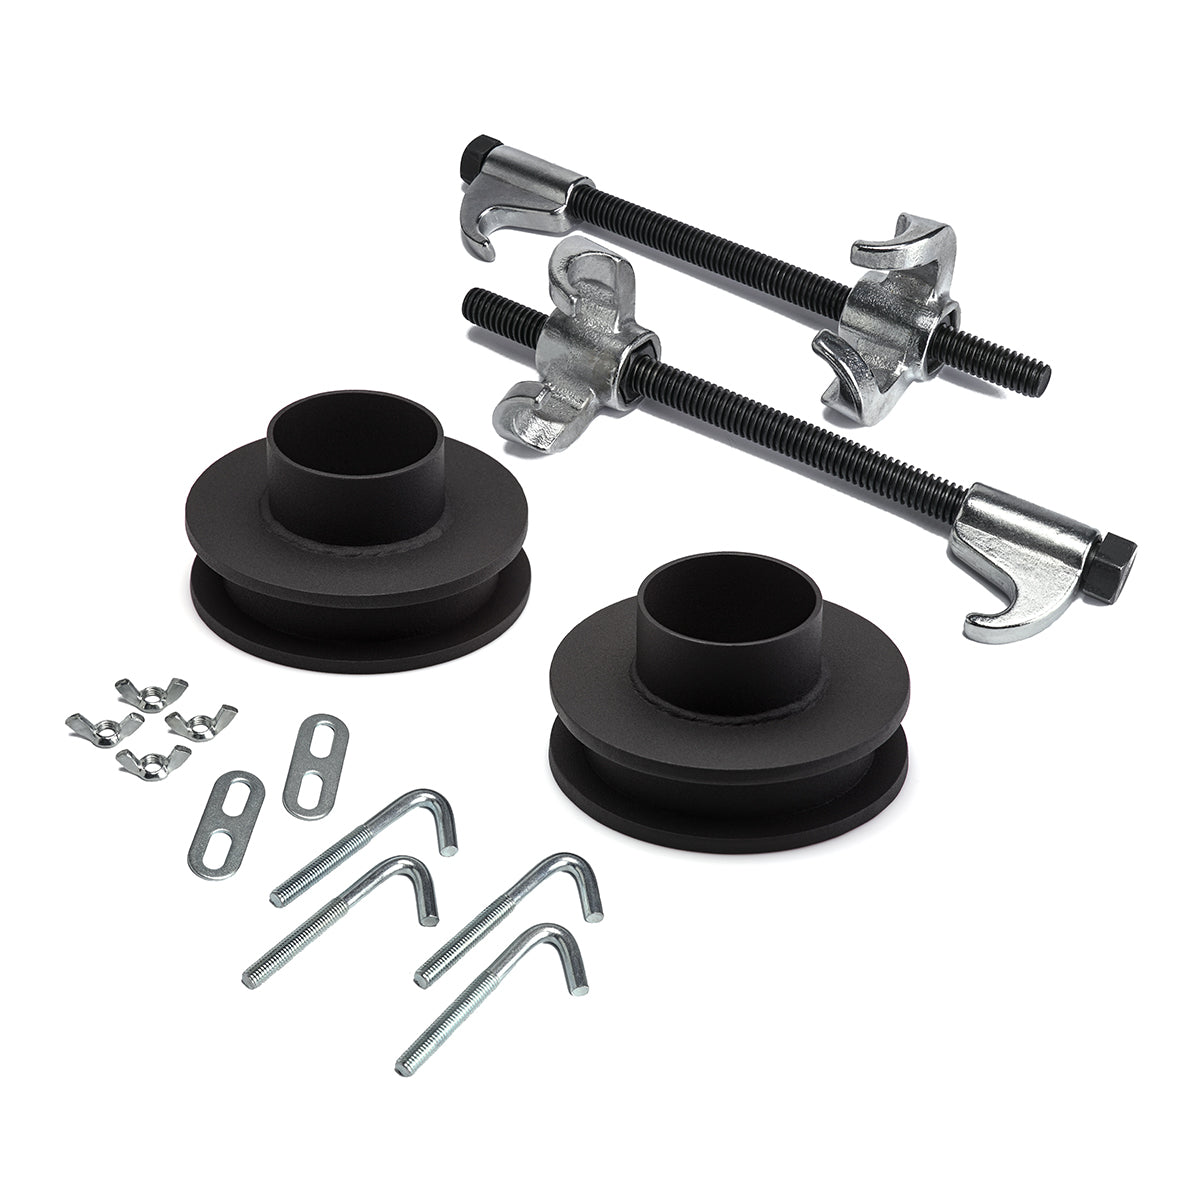 1999-2007 Chevy Silverado 1500 2WD Front Lift Kit with Compressor Tool